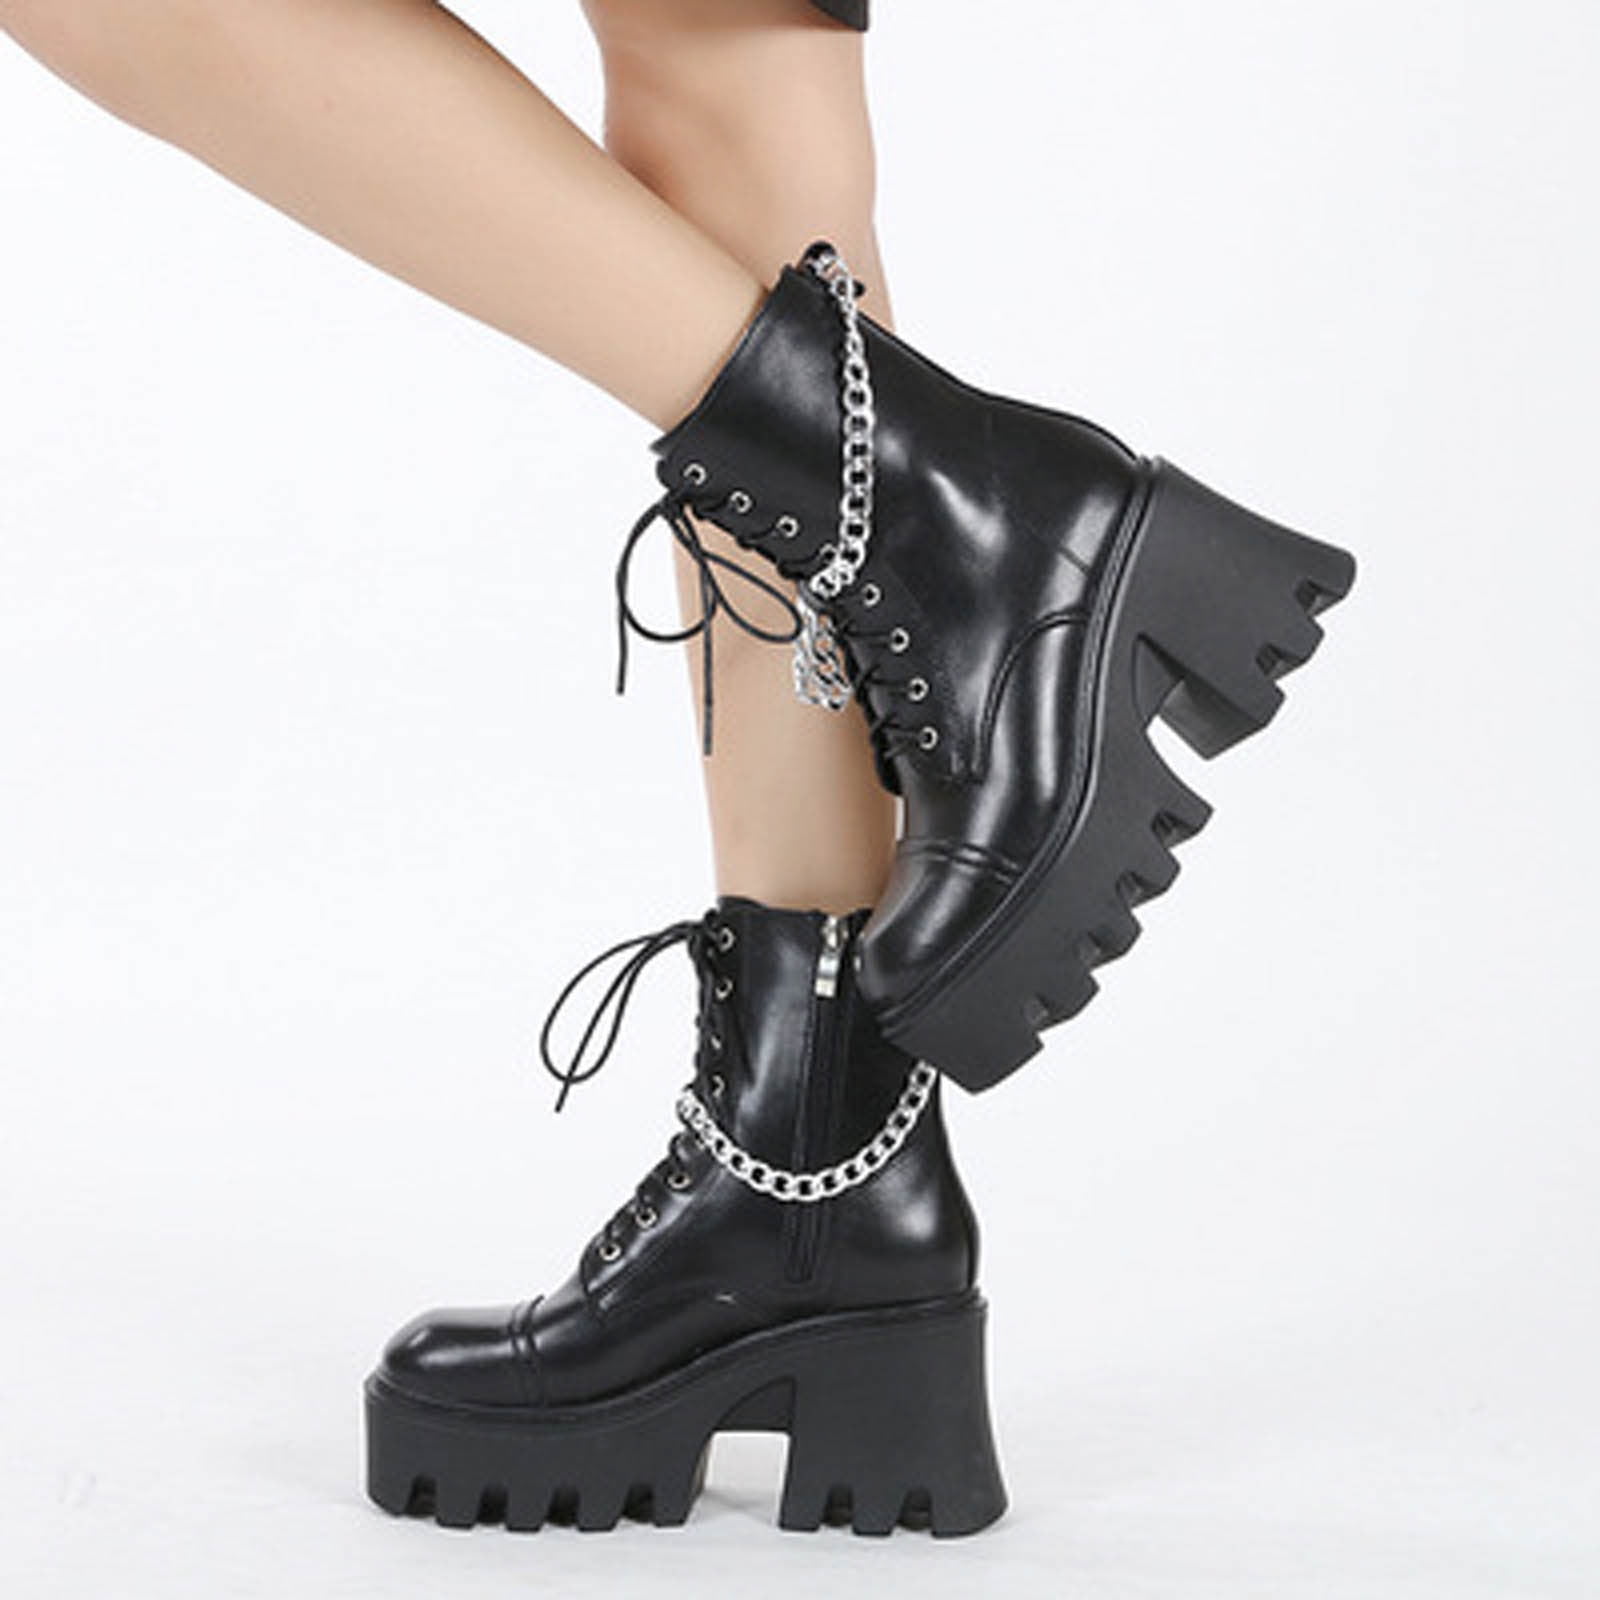 Womens Lace Up Punk Platform Ankle Boots Combat Riding Shoes Block High Heel New 